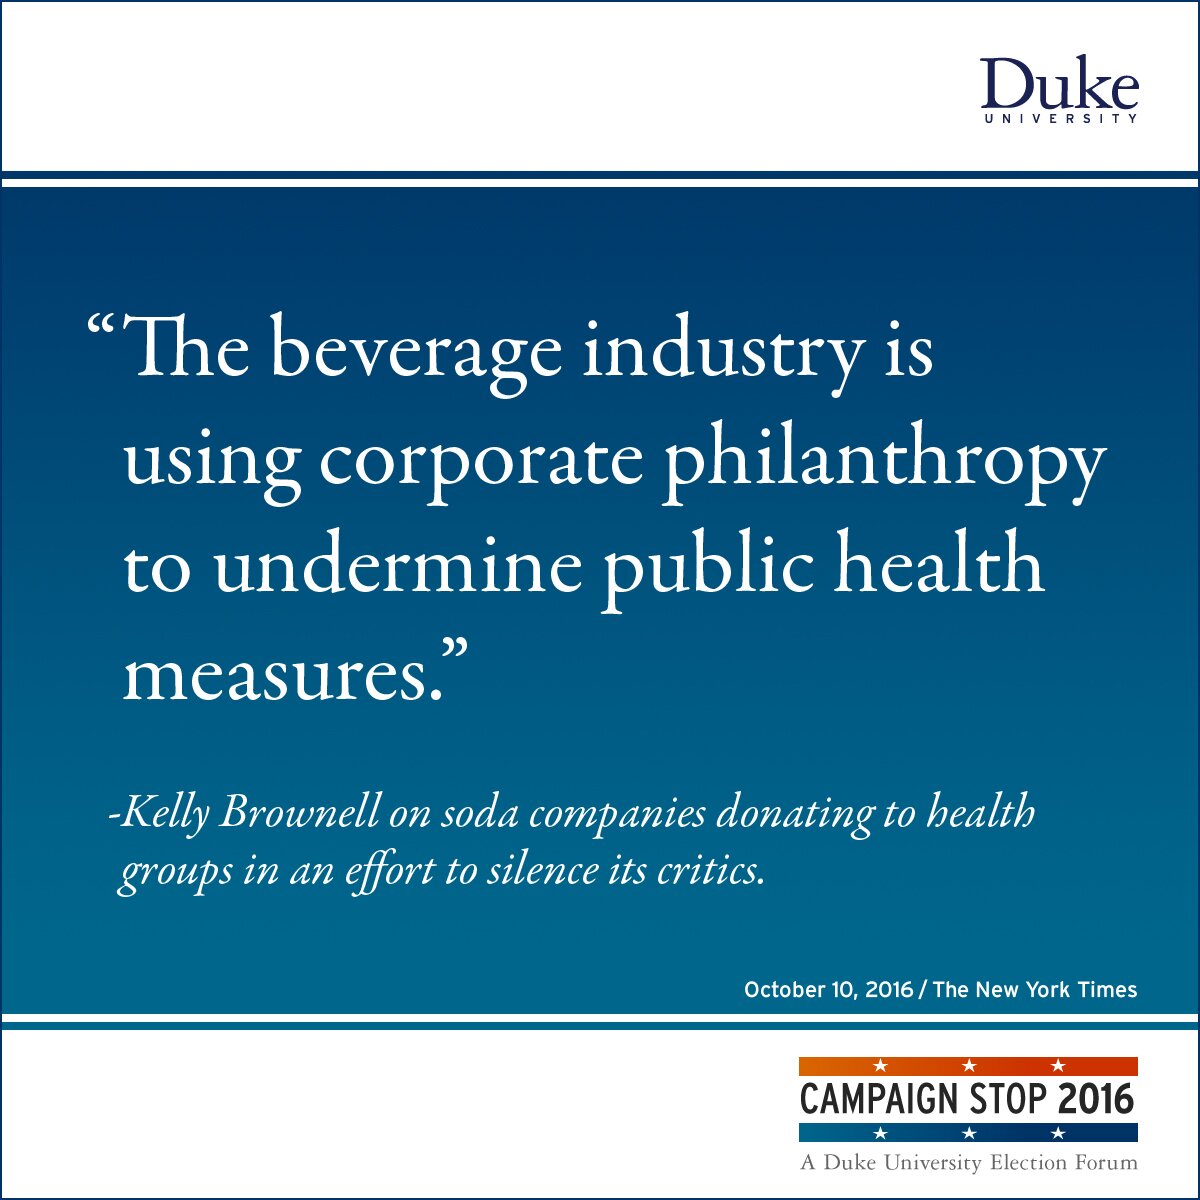 “The beverage industry is using corporate philanthropy to undermine public health measures.” -Kelly Brownell on soda companies donating to health groups in an effort to silence its critics.